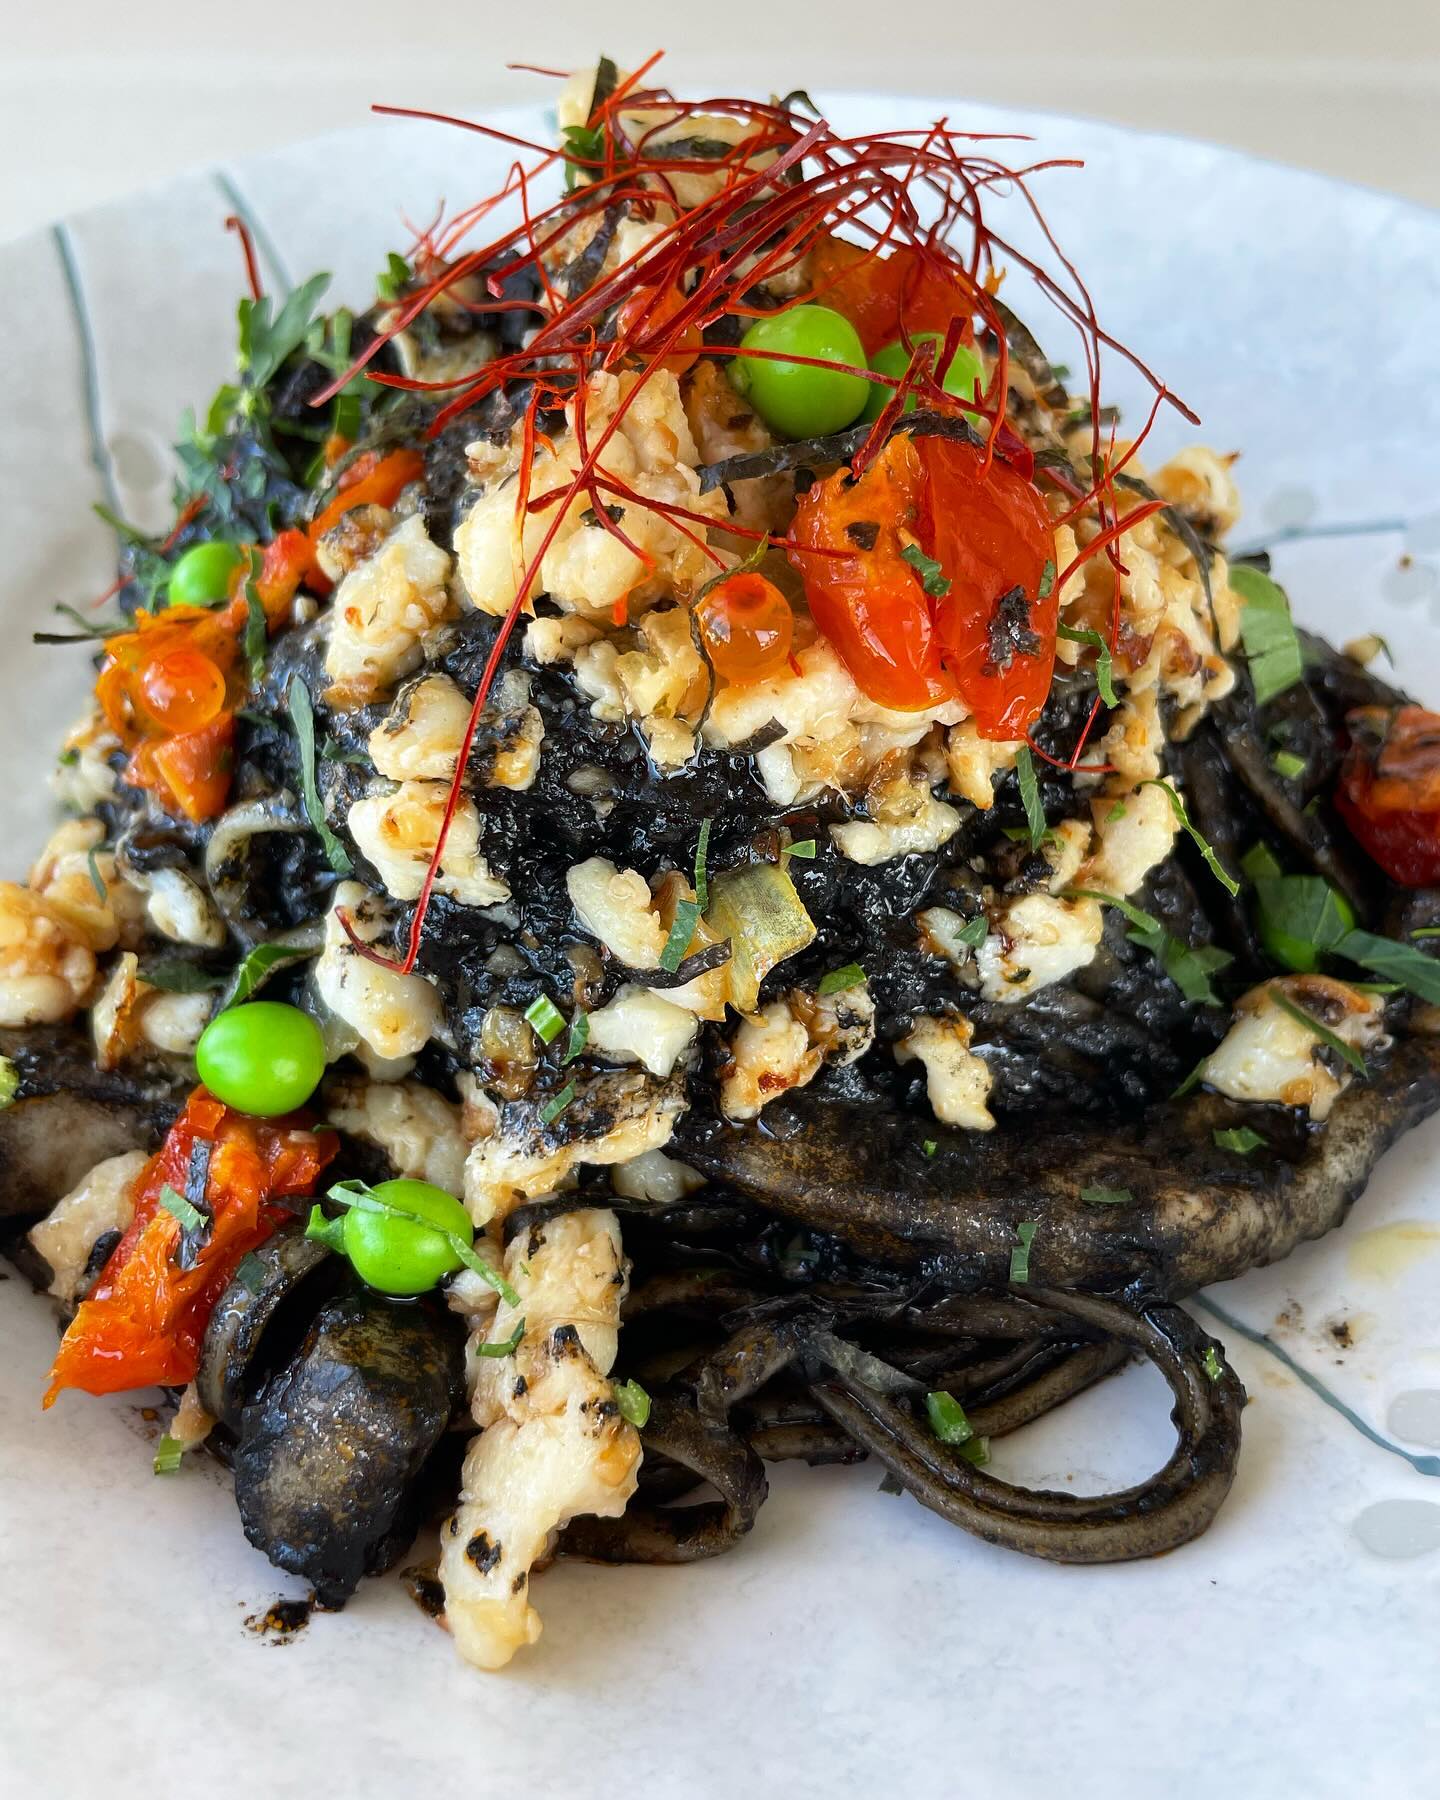 Limited special

Squid ink linguine .
Calamari, blue swimmer crab meats, semi dried tomato, garden pea

Come for lunch/dinner to try our Japanese Italian fusion.